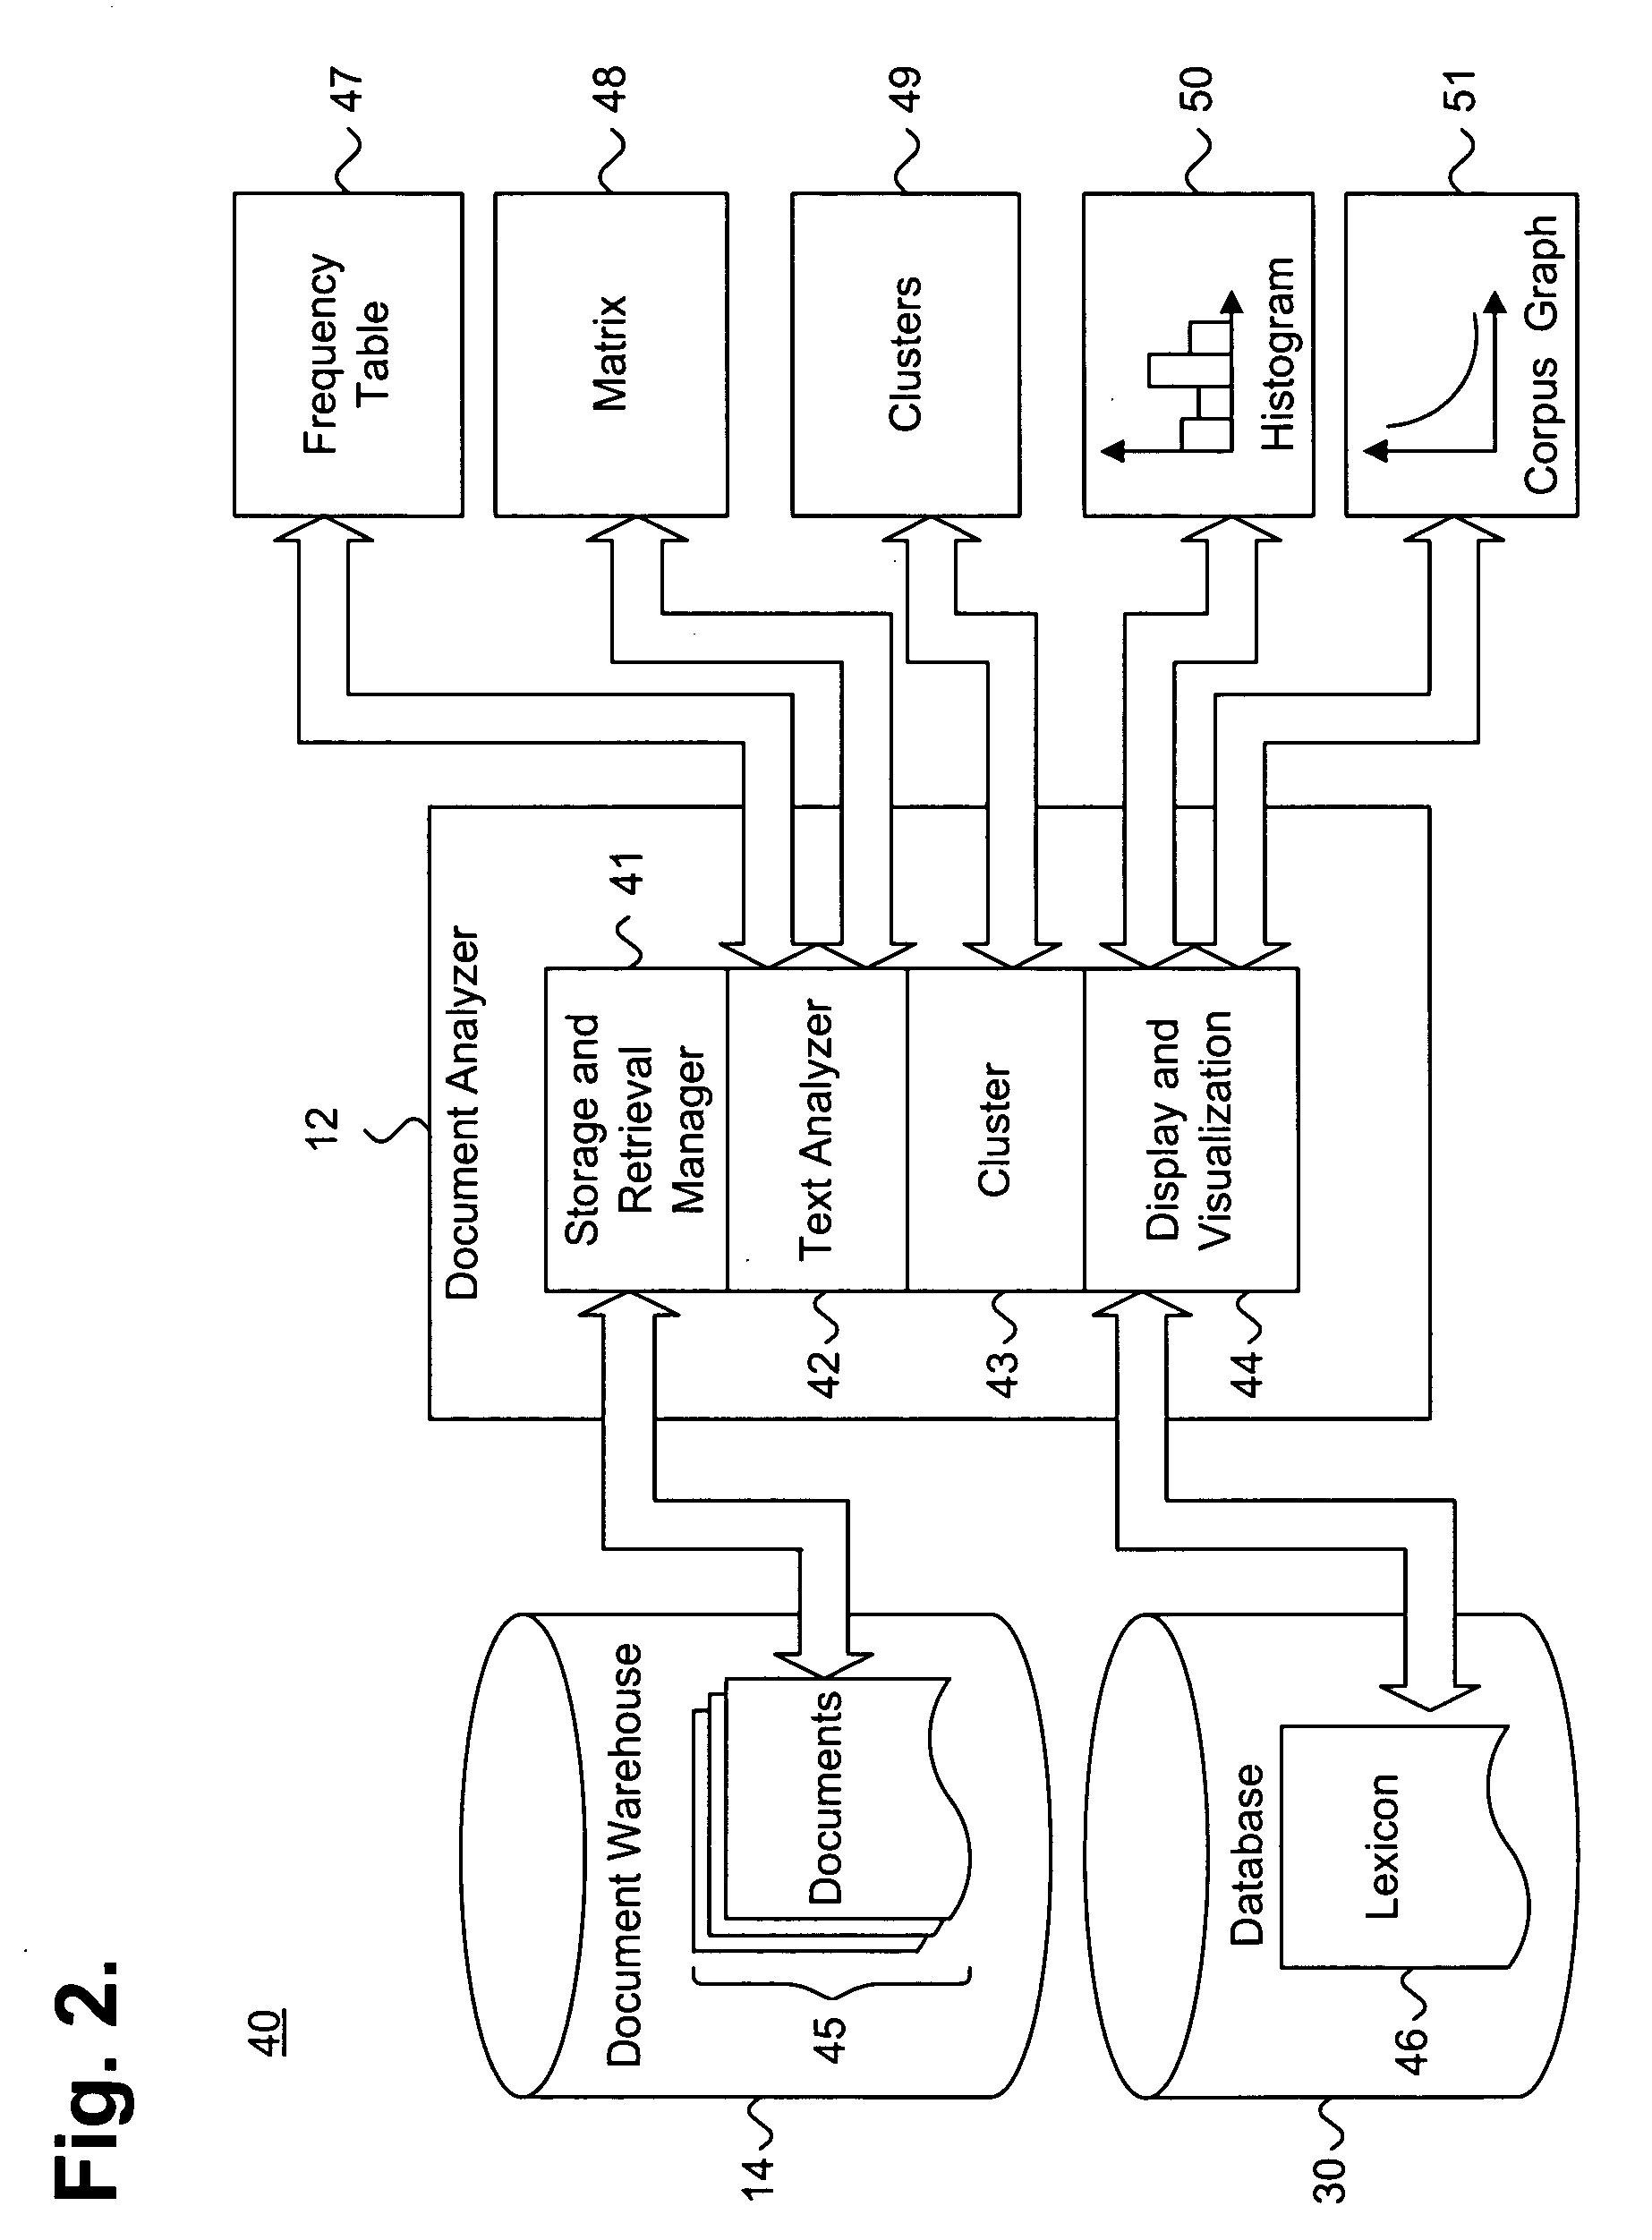 System and method for efficiently generating cluster groupings in a multi-dimensional concept space